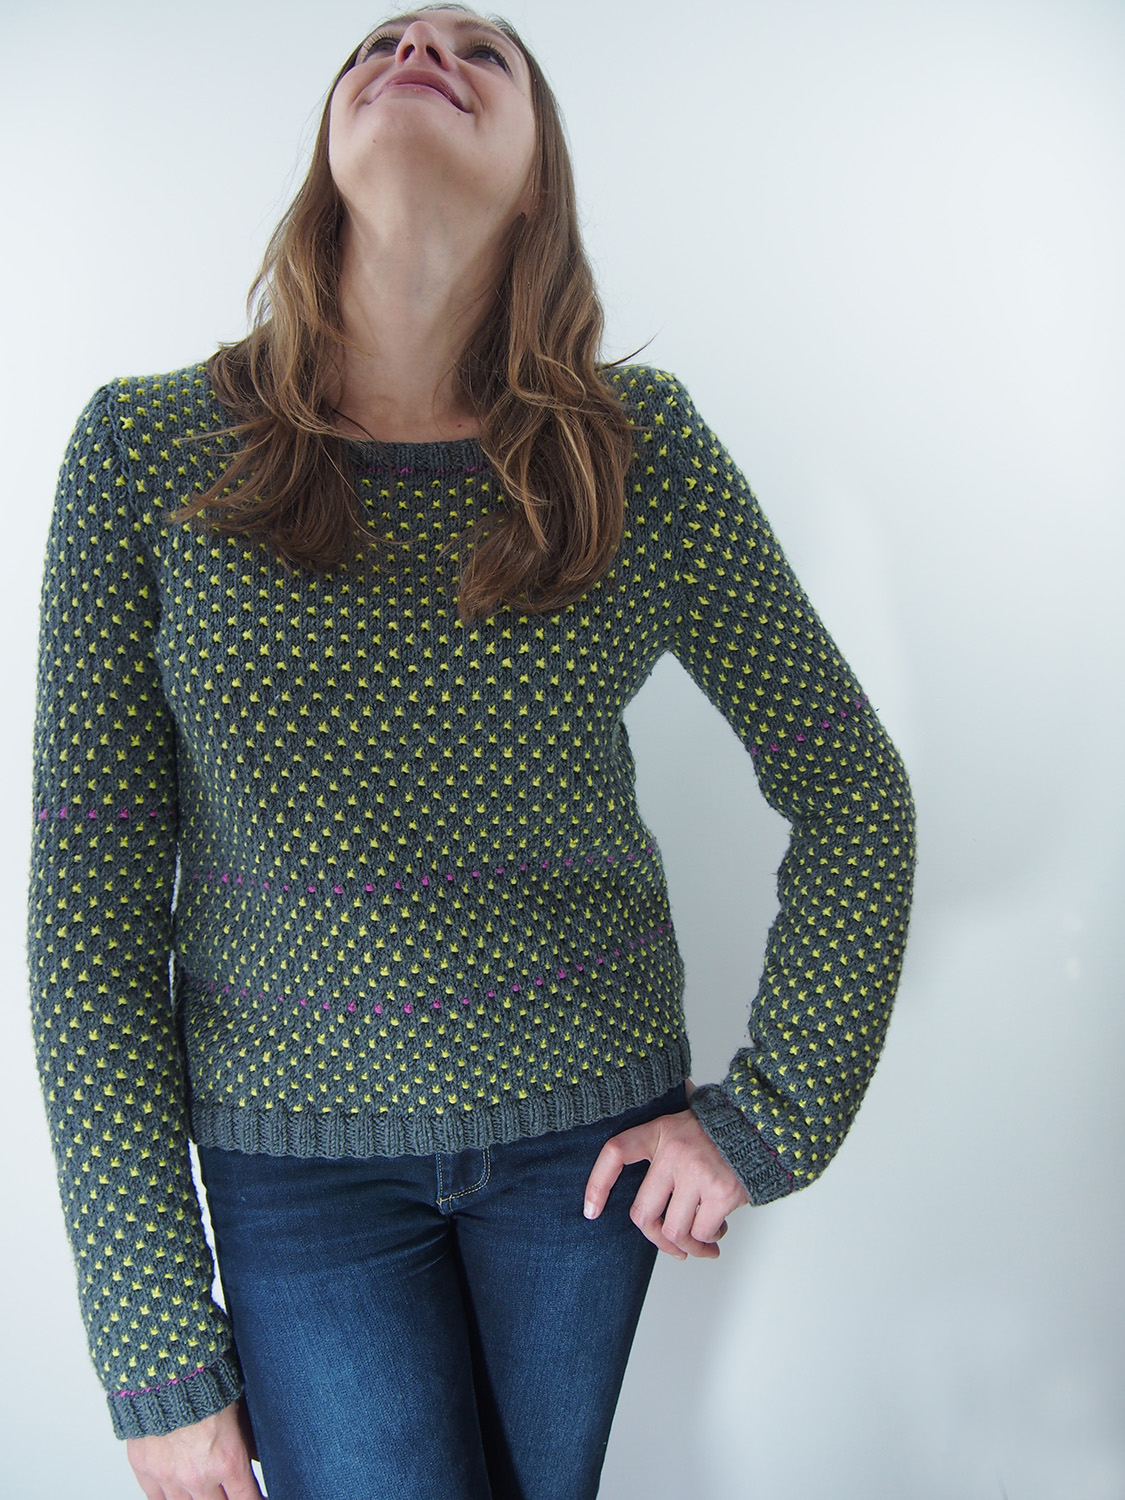 The Easiest Polka Dots You'll Ever Knit -- Mayfair by Martin Storey